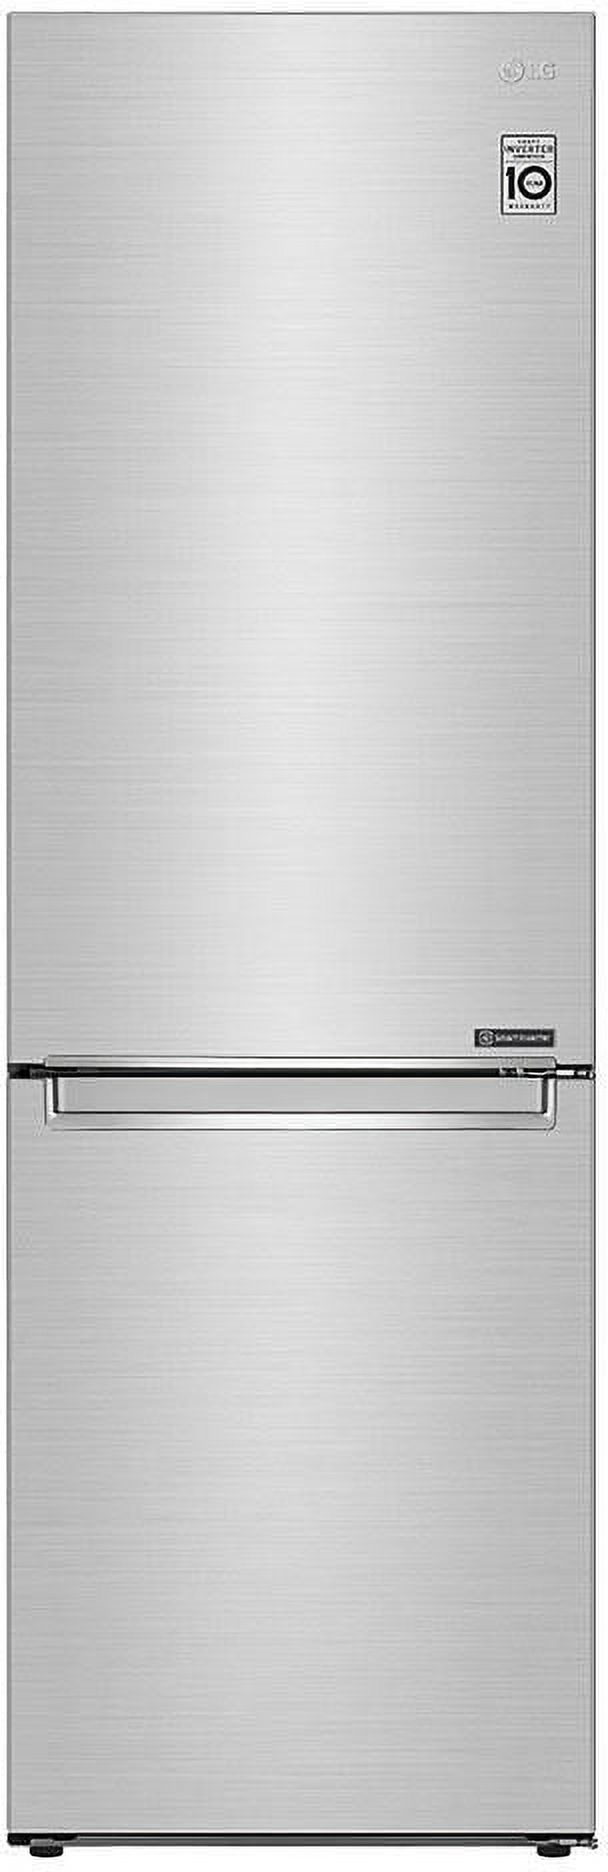 LG LRBCC1204S  BOTTOM FREEZER FREESTANDING REFRIGERATOR Stainless Steel - image 1 of 3